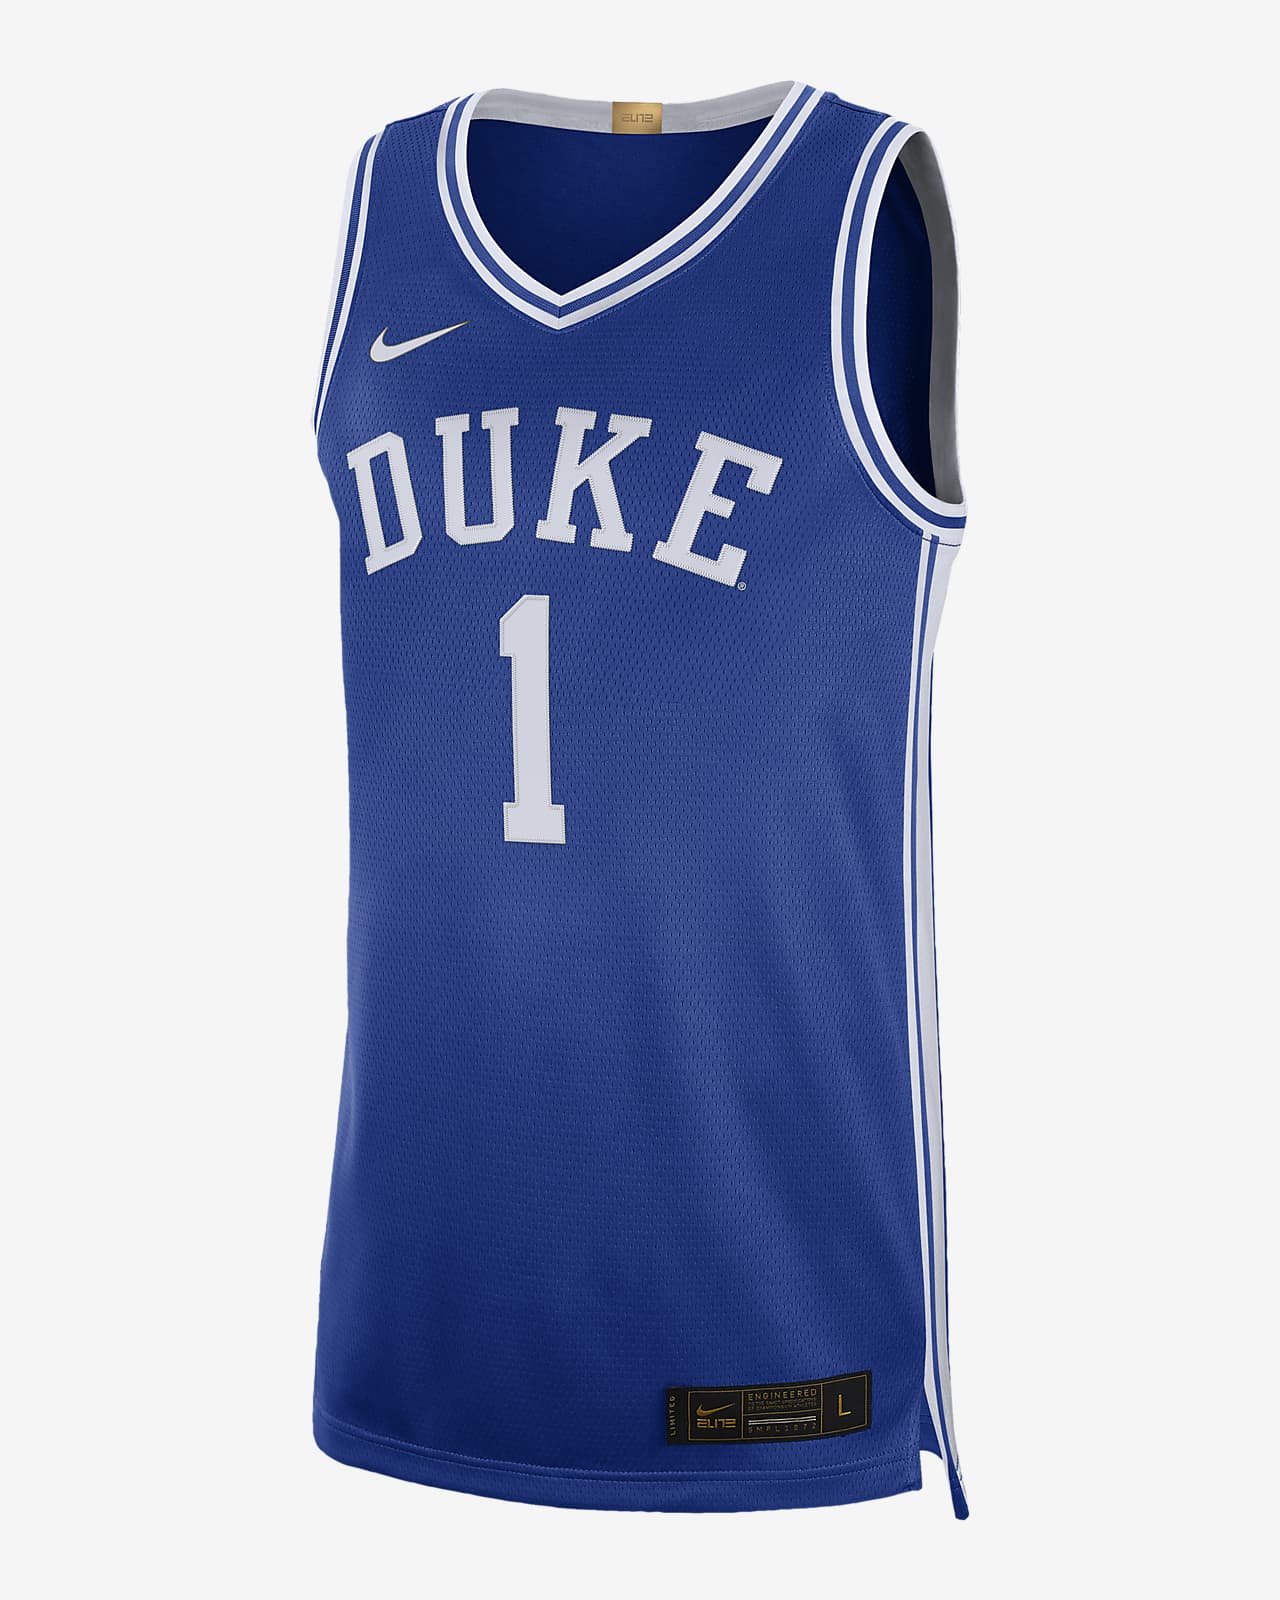 zion williamson jersey for sale